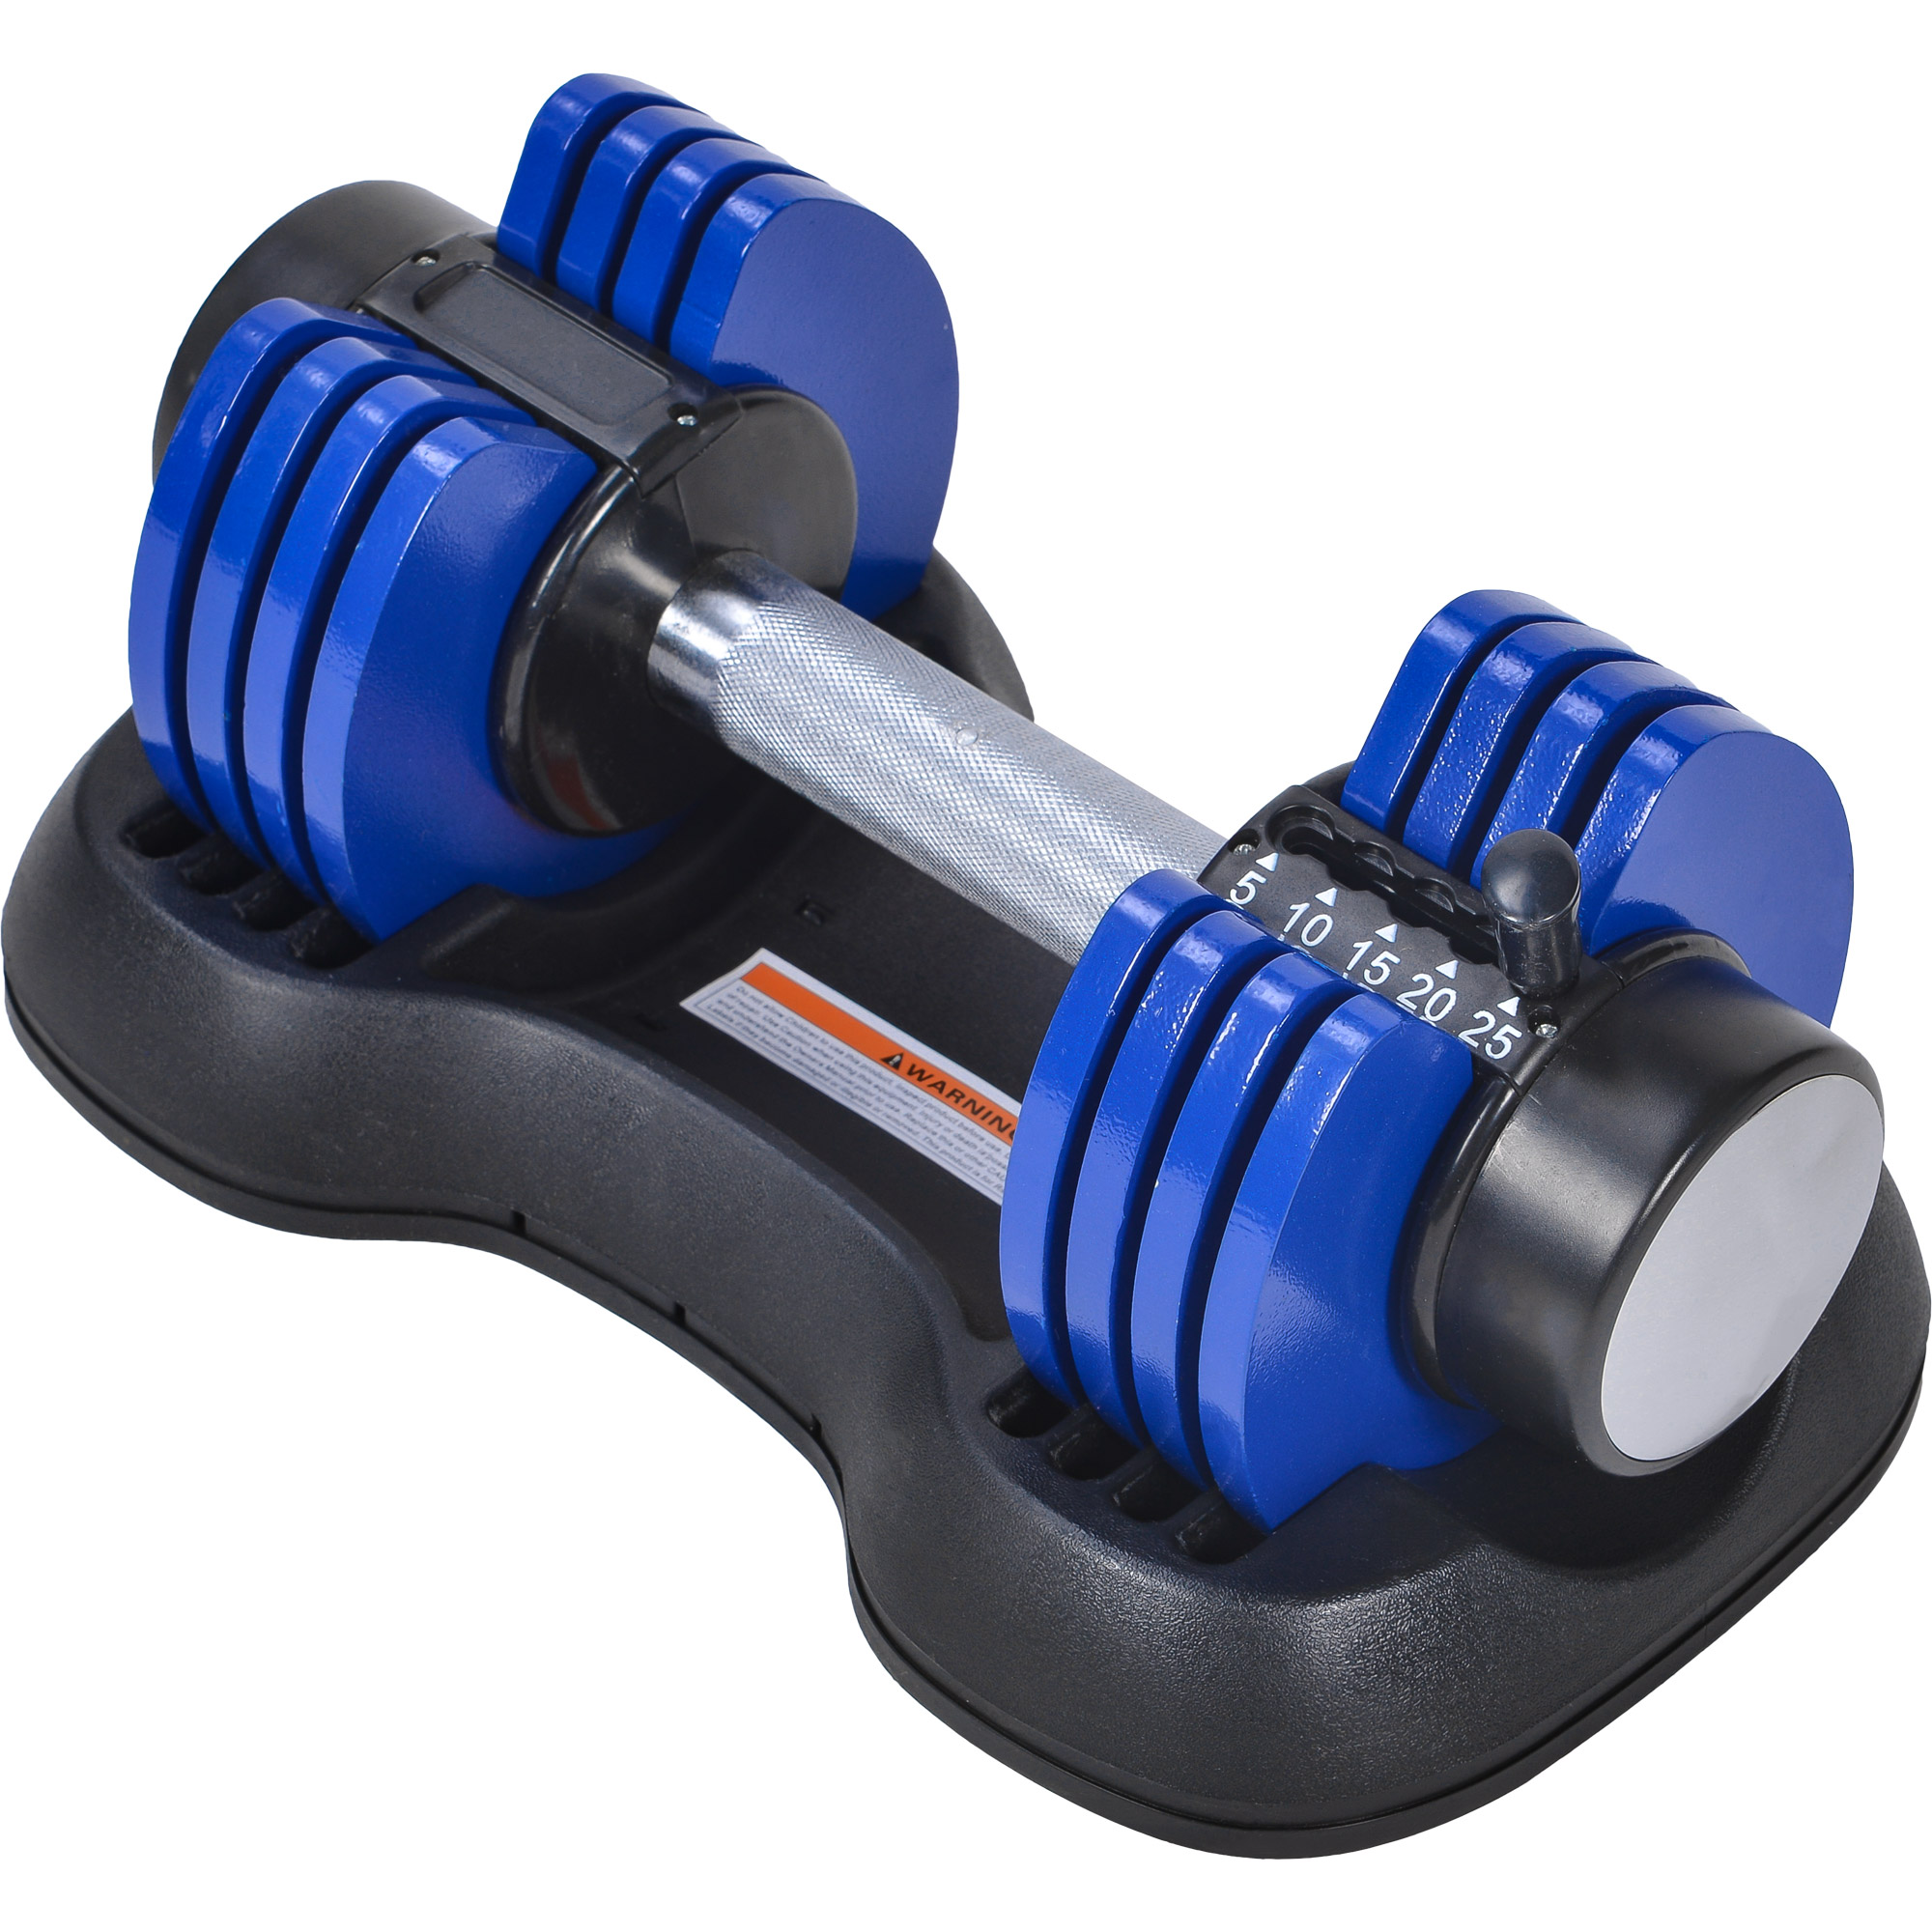 Adjustable Dumbbell 25 lbs with Fast Automatic Adjustable and Weight Plate for Body Workout Home Gym, blue, Note: Single-Boyel Living